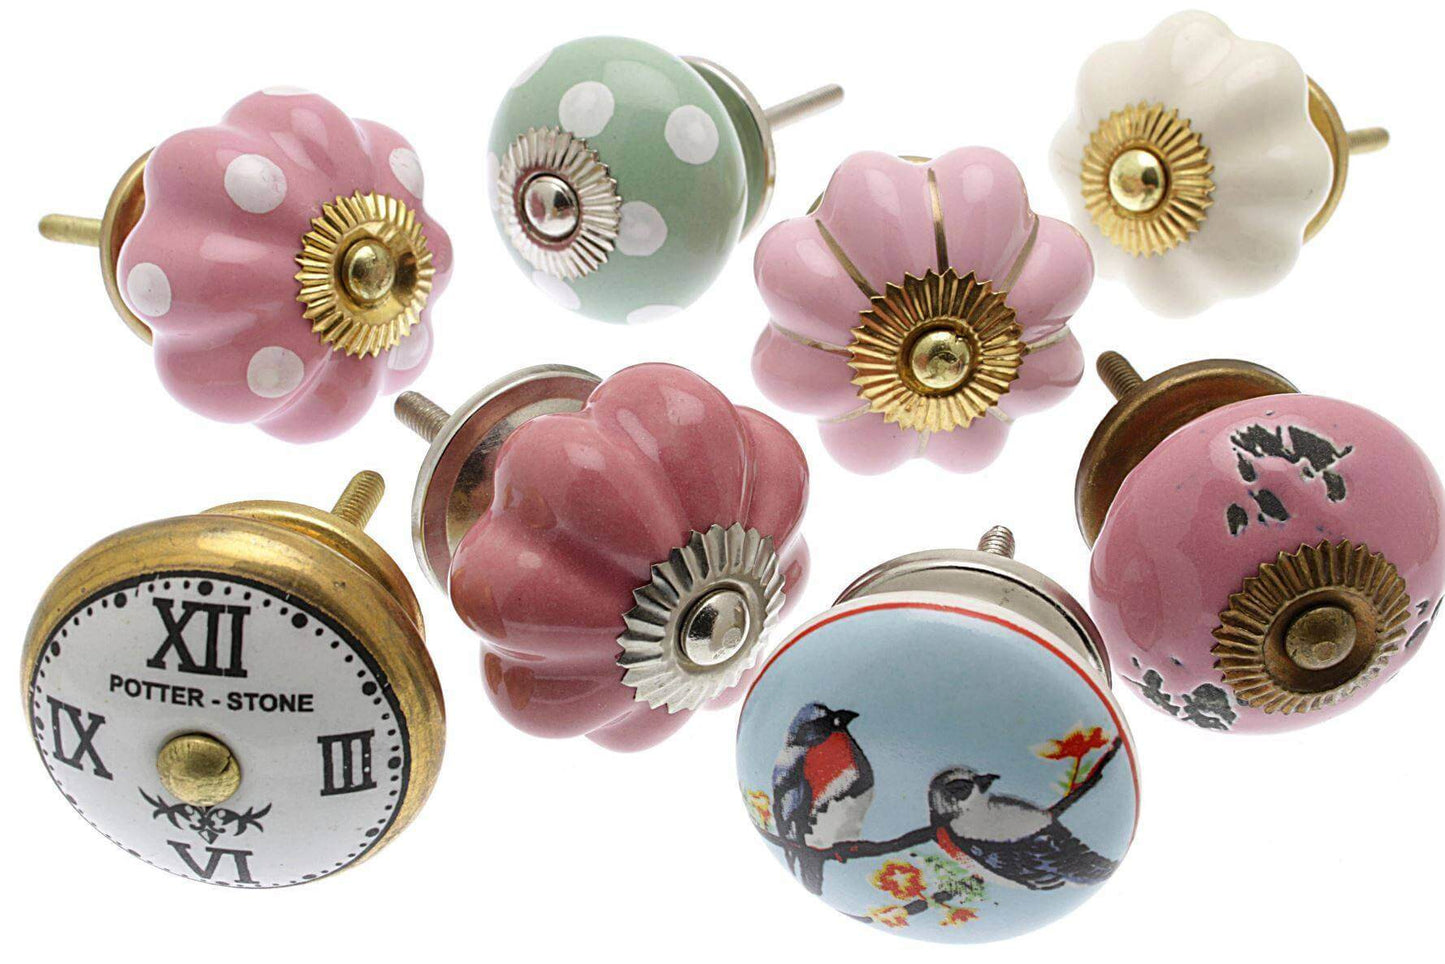 Cupboard Knobs - Mixed Set Of 8 Once Upon A Time Pastel Shades Ceramic Knobs (MG-40)